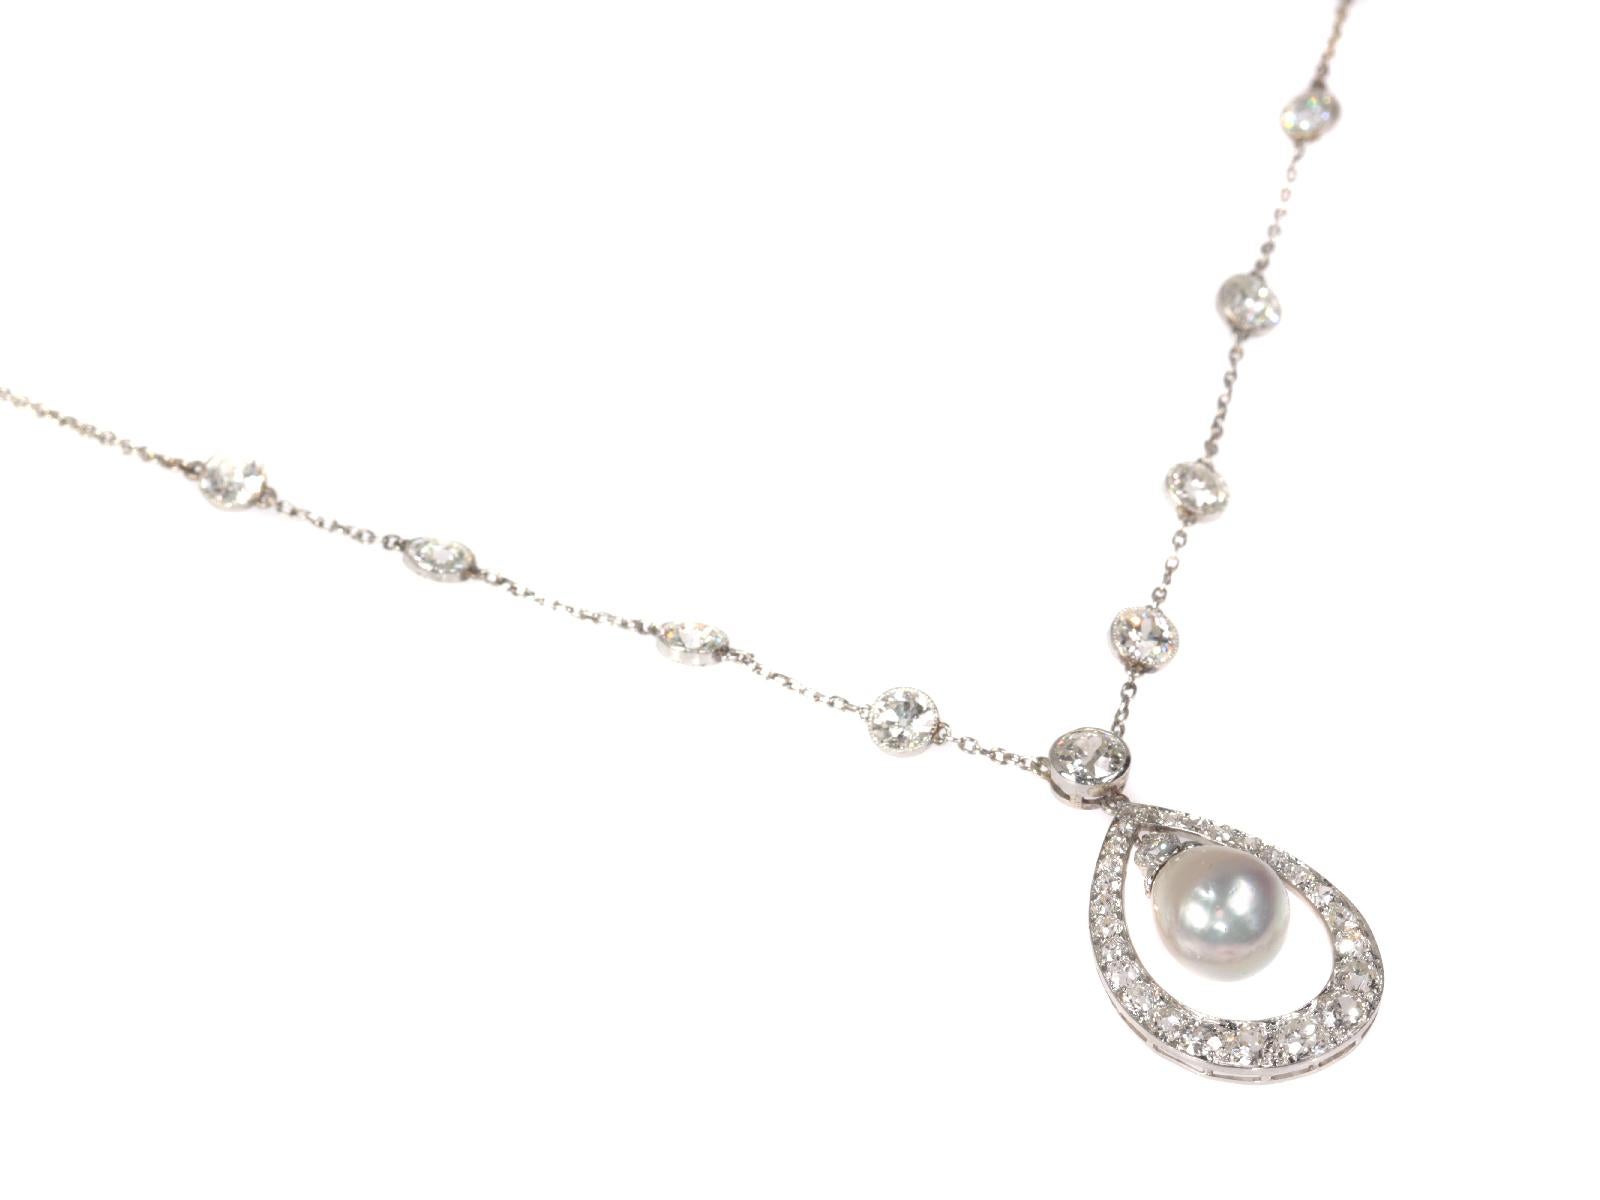 Platinum Art Deco Diamond Necklace with Natural Drop Pearl of 7 Carat, 1930s For Sale 1